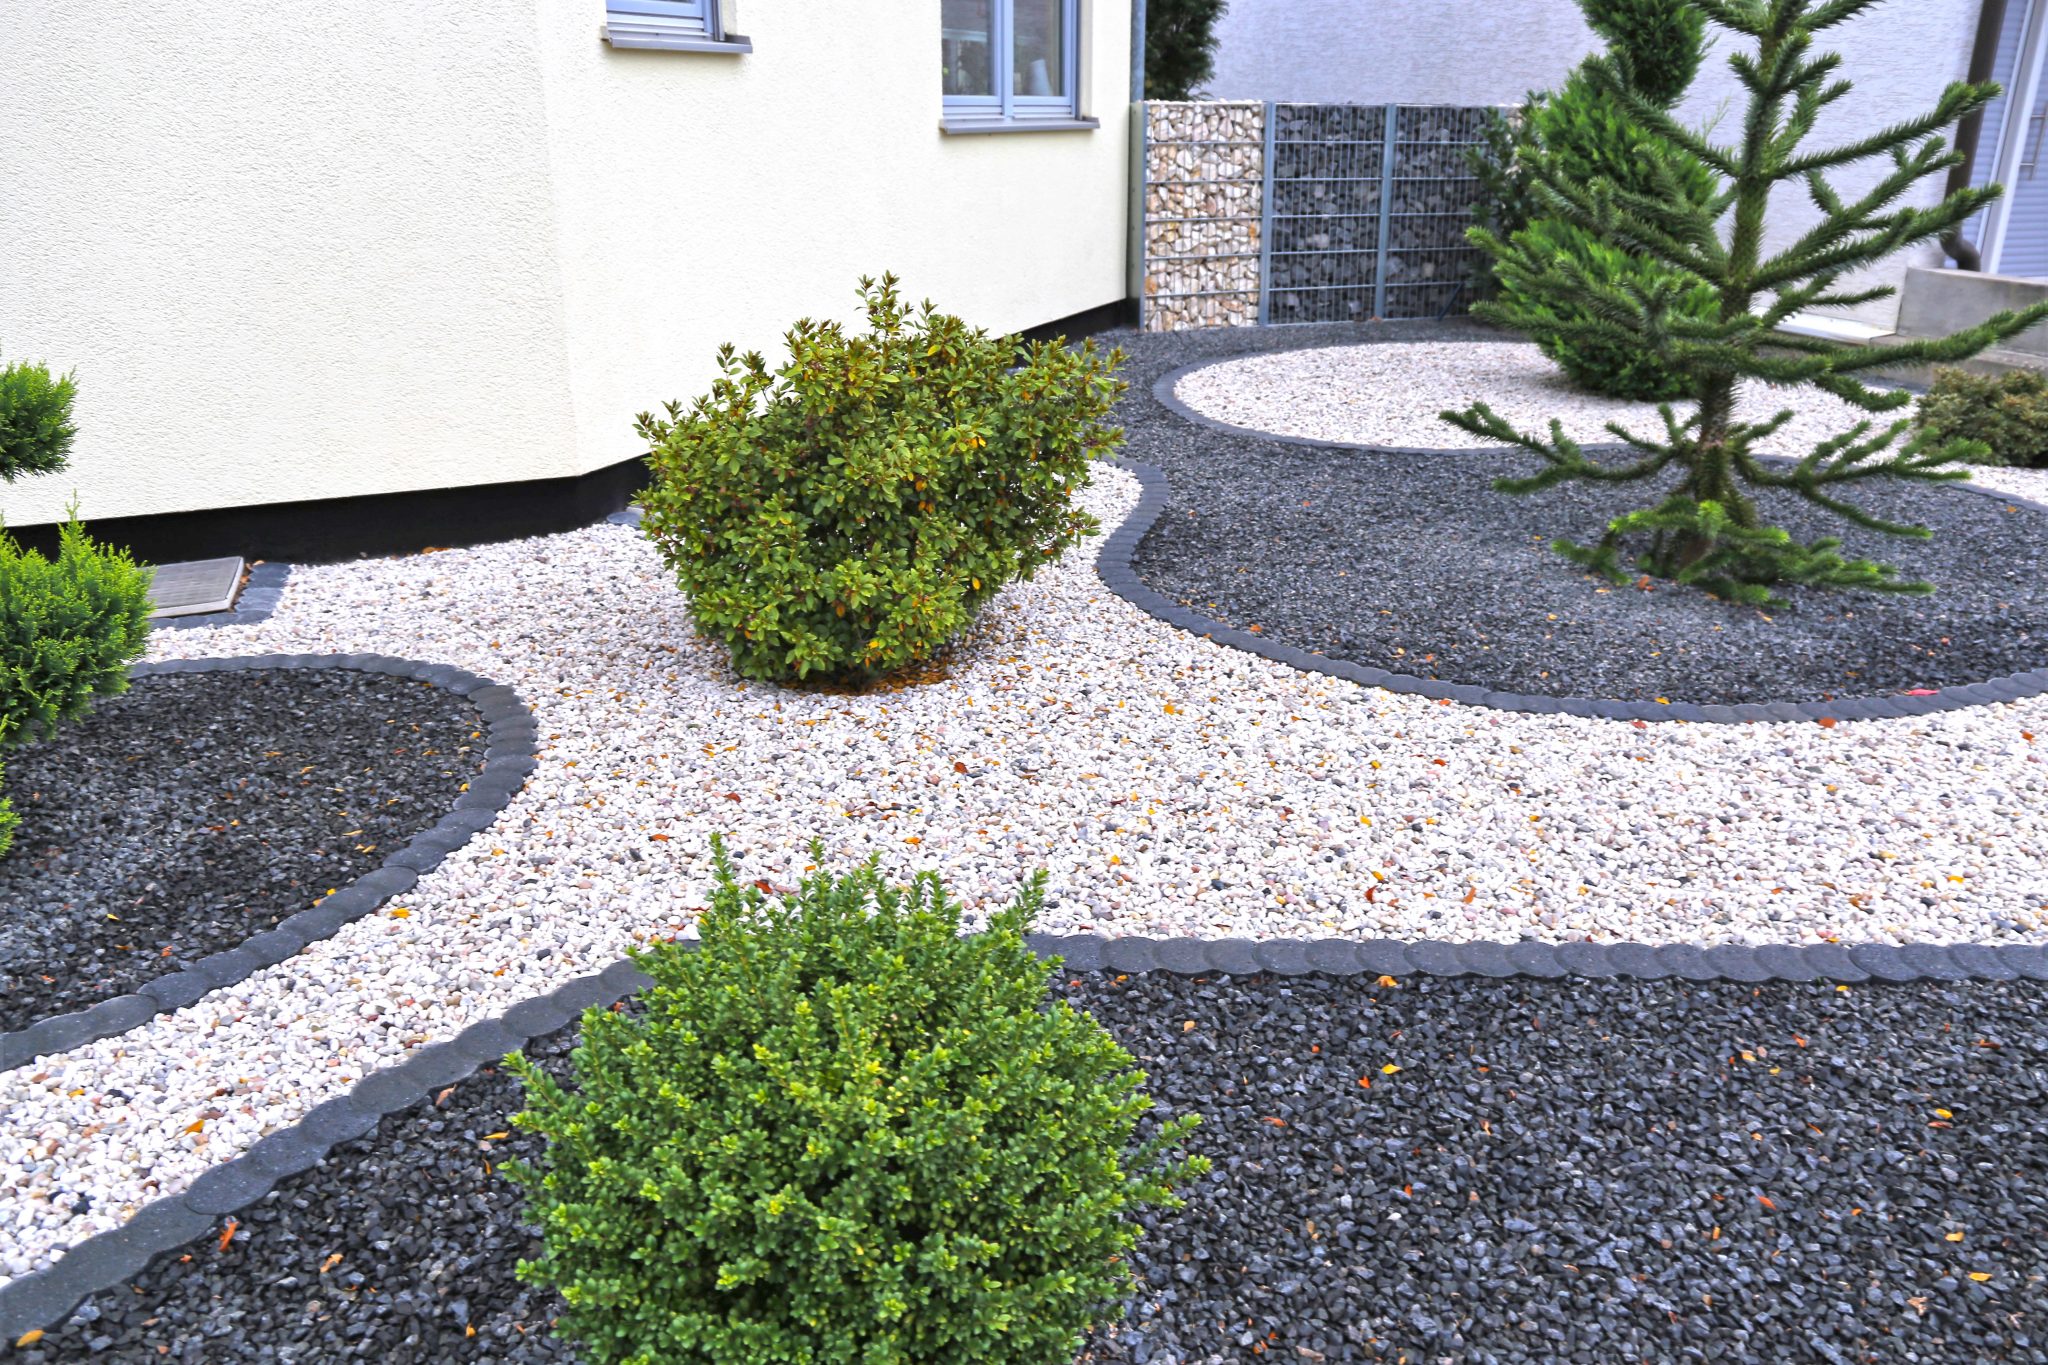 Landscaping With Decorative Rock, Where To Get Rocks For Landscaping